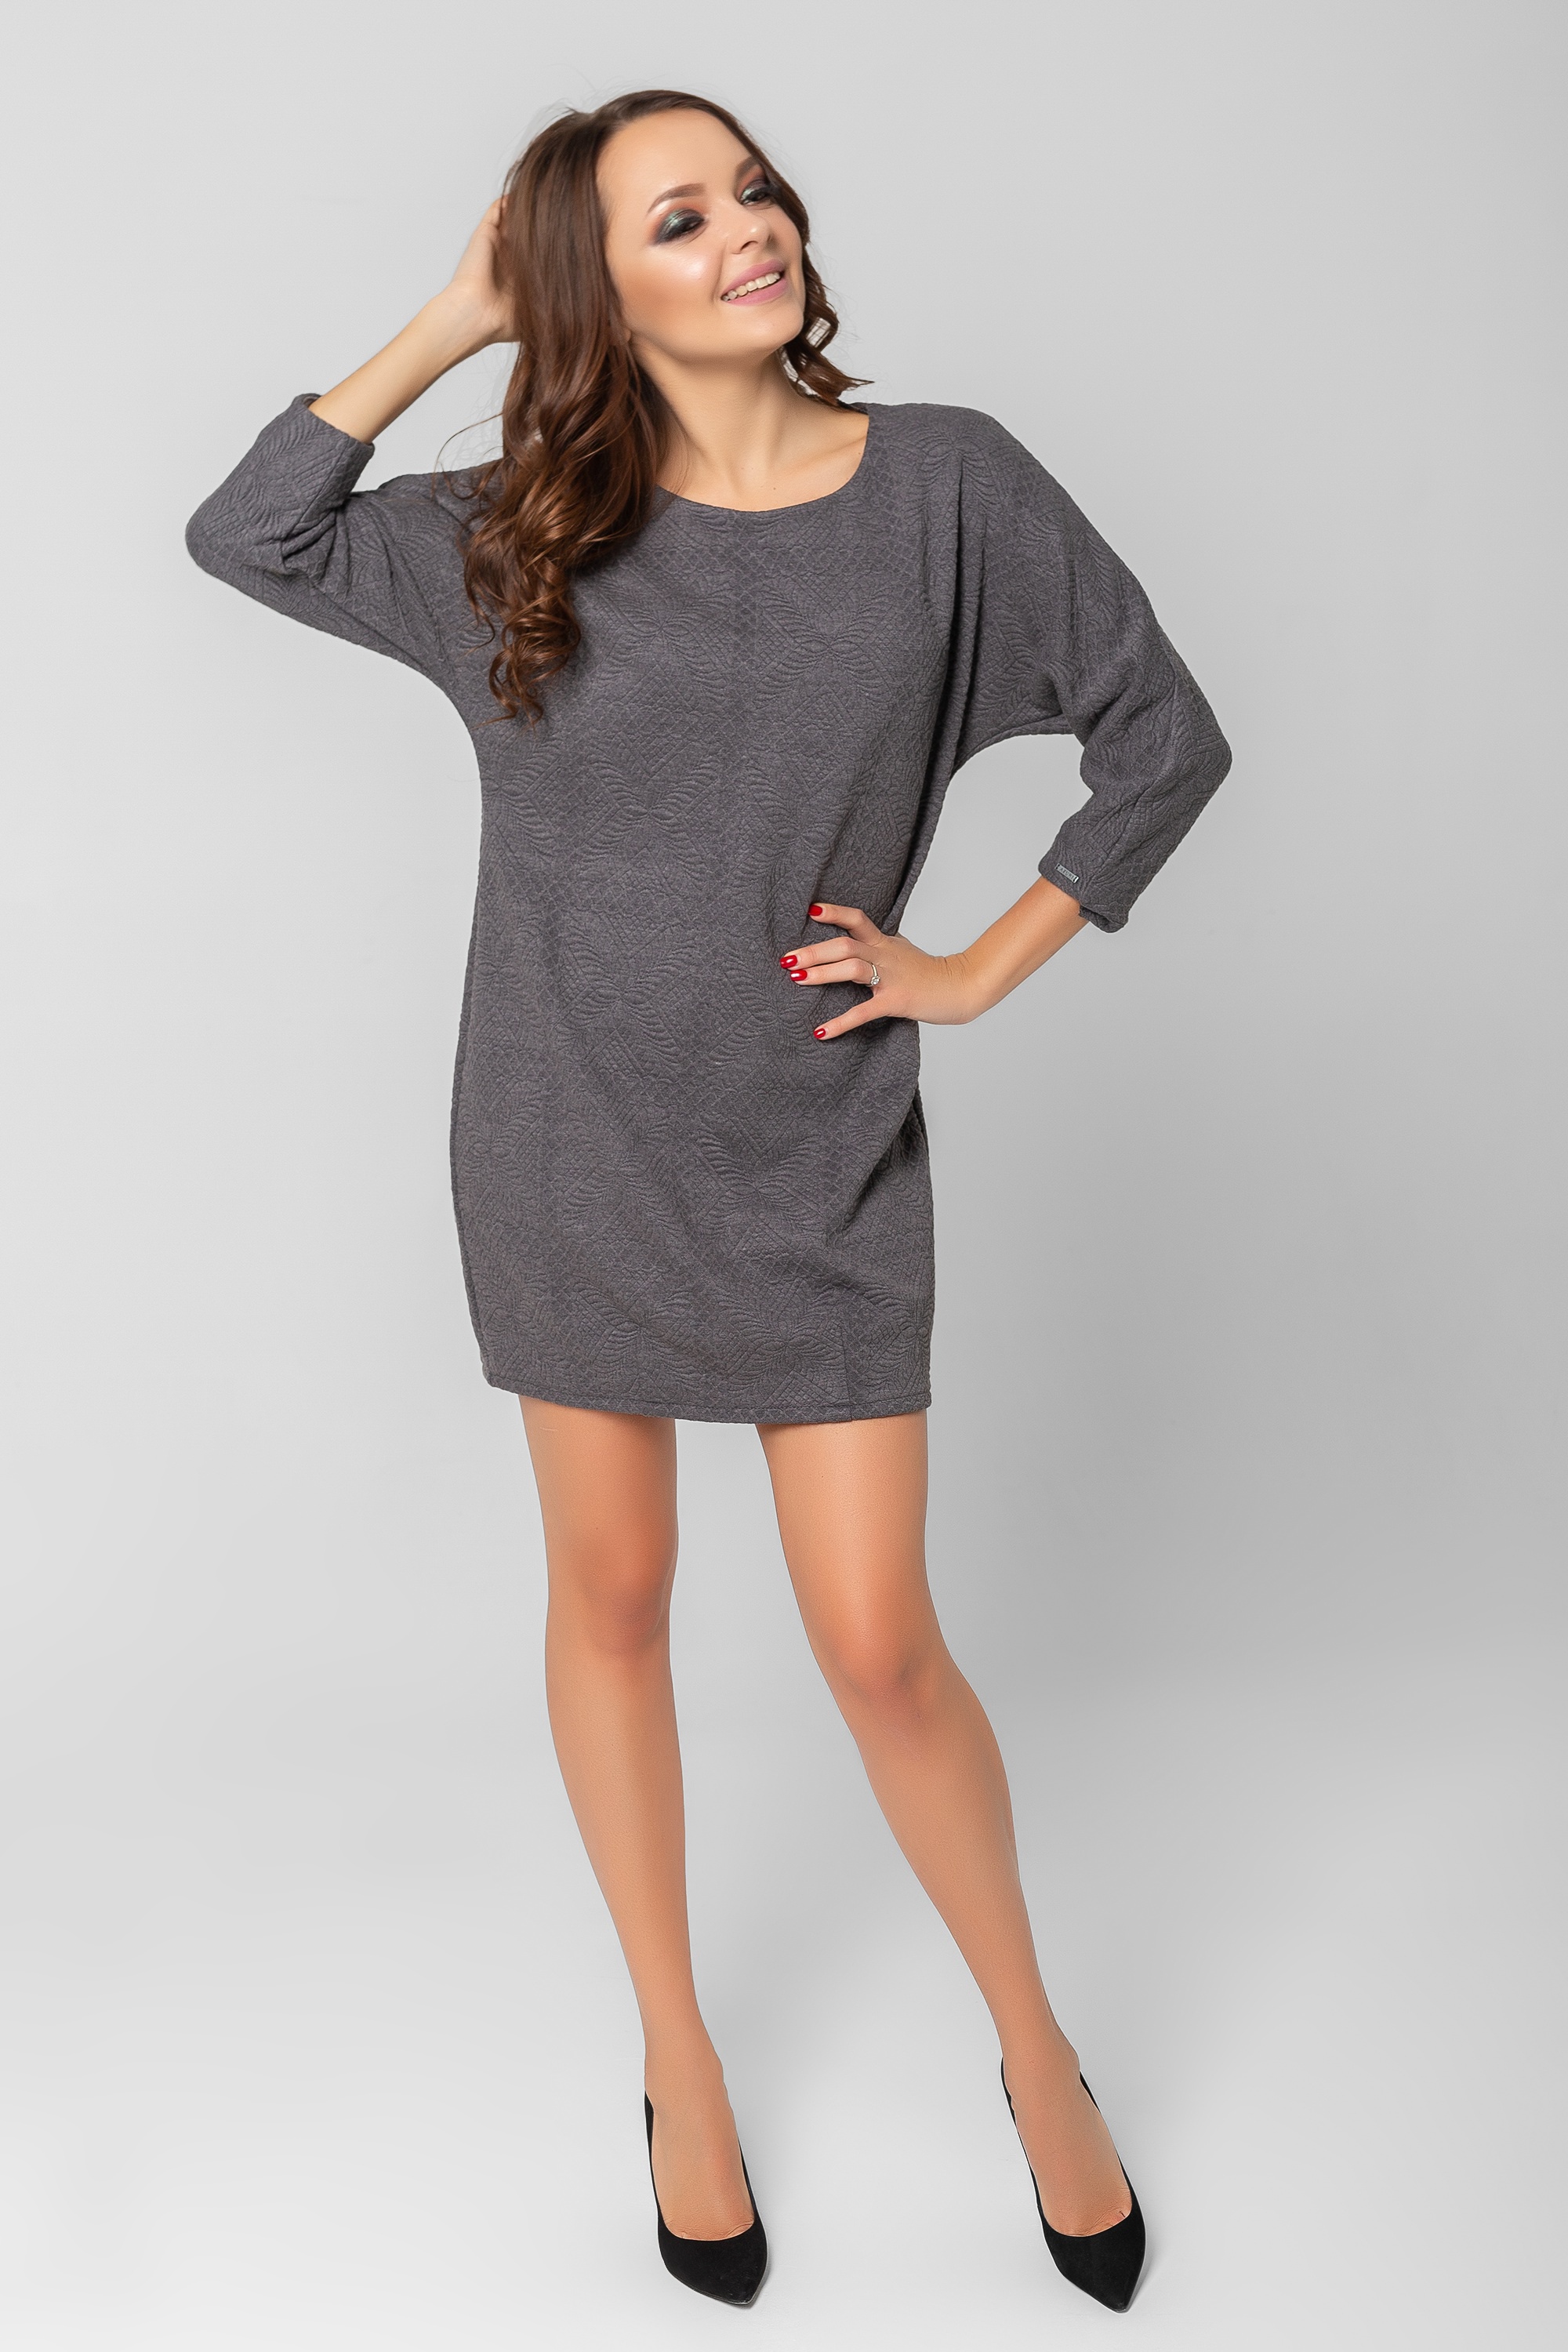 Textured dress with a batwing sleeve.